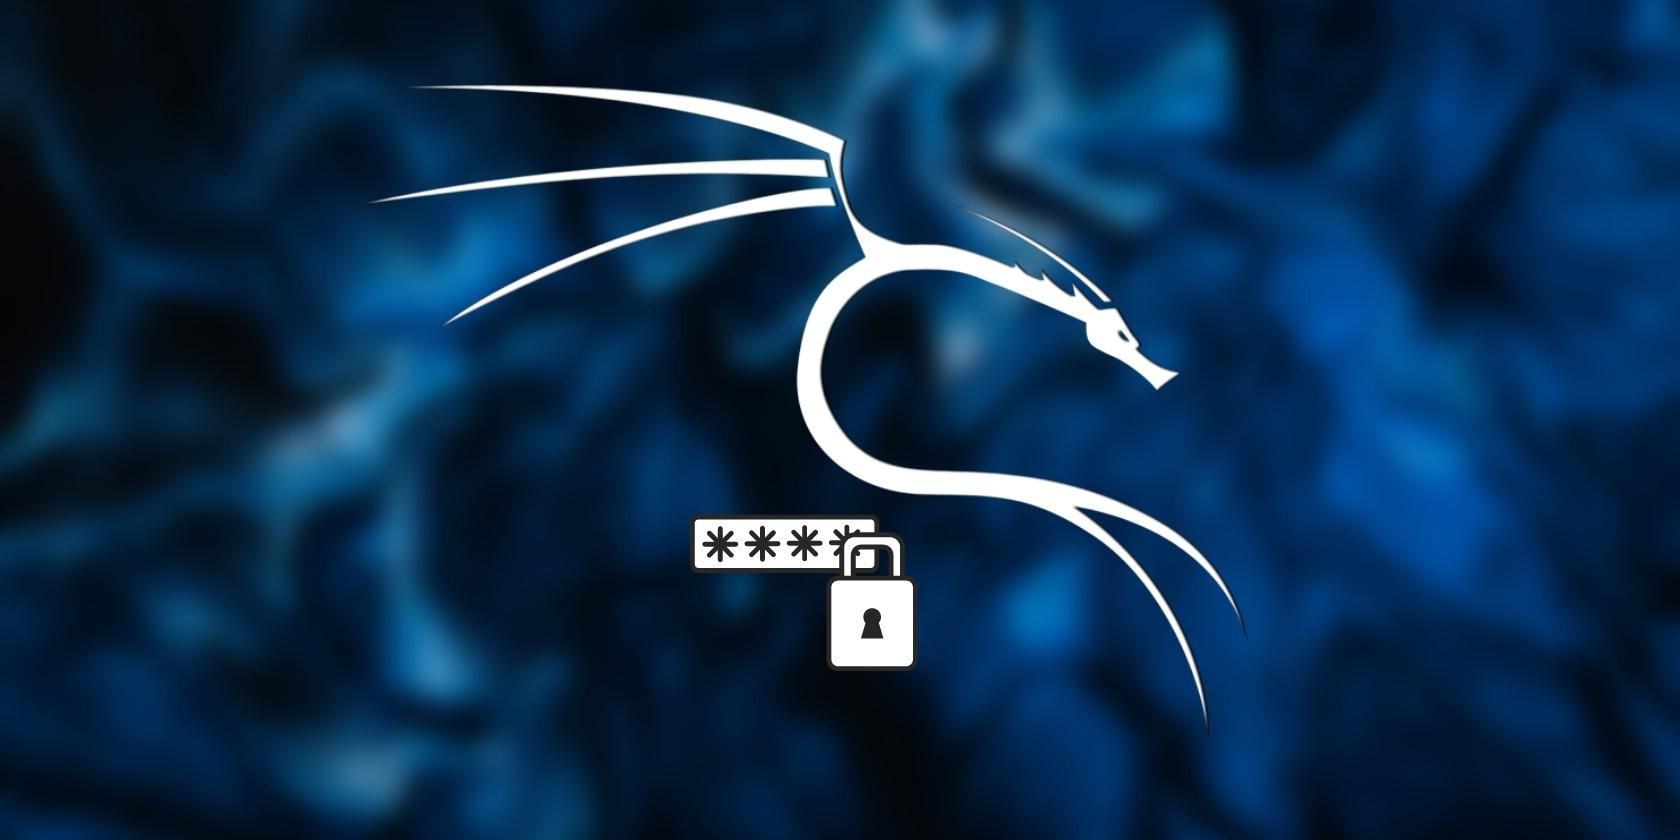 How to Install Kali Linux on Windows